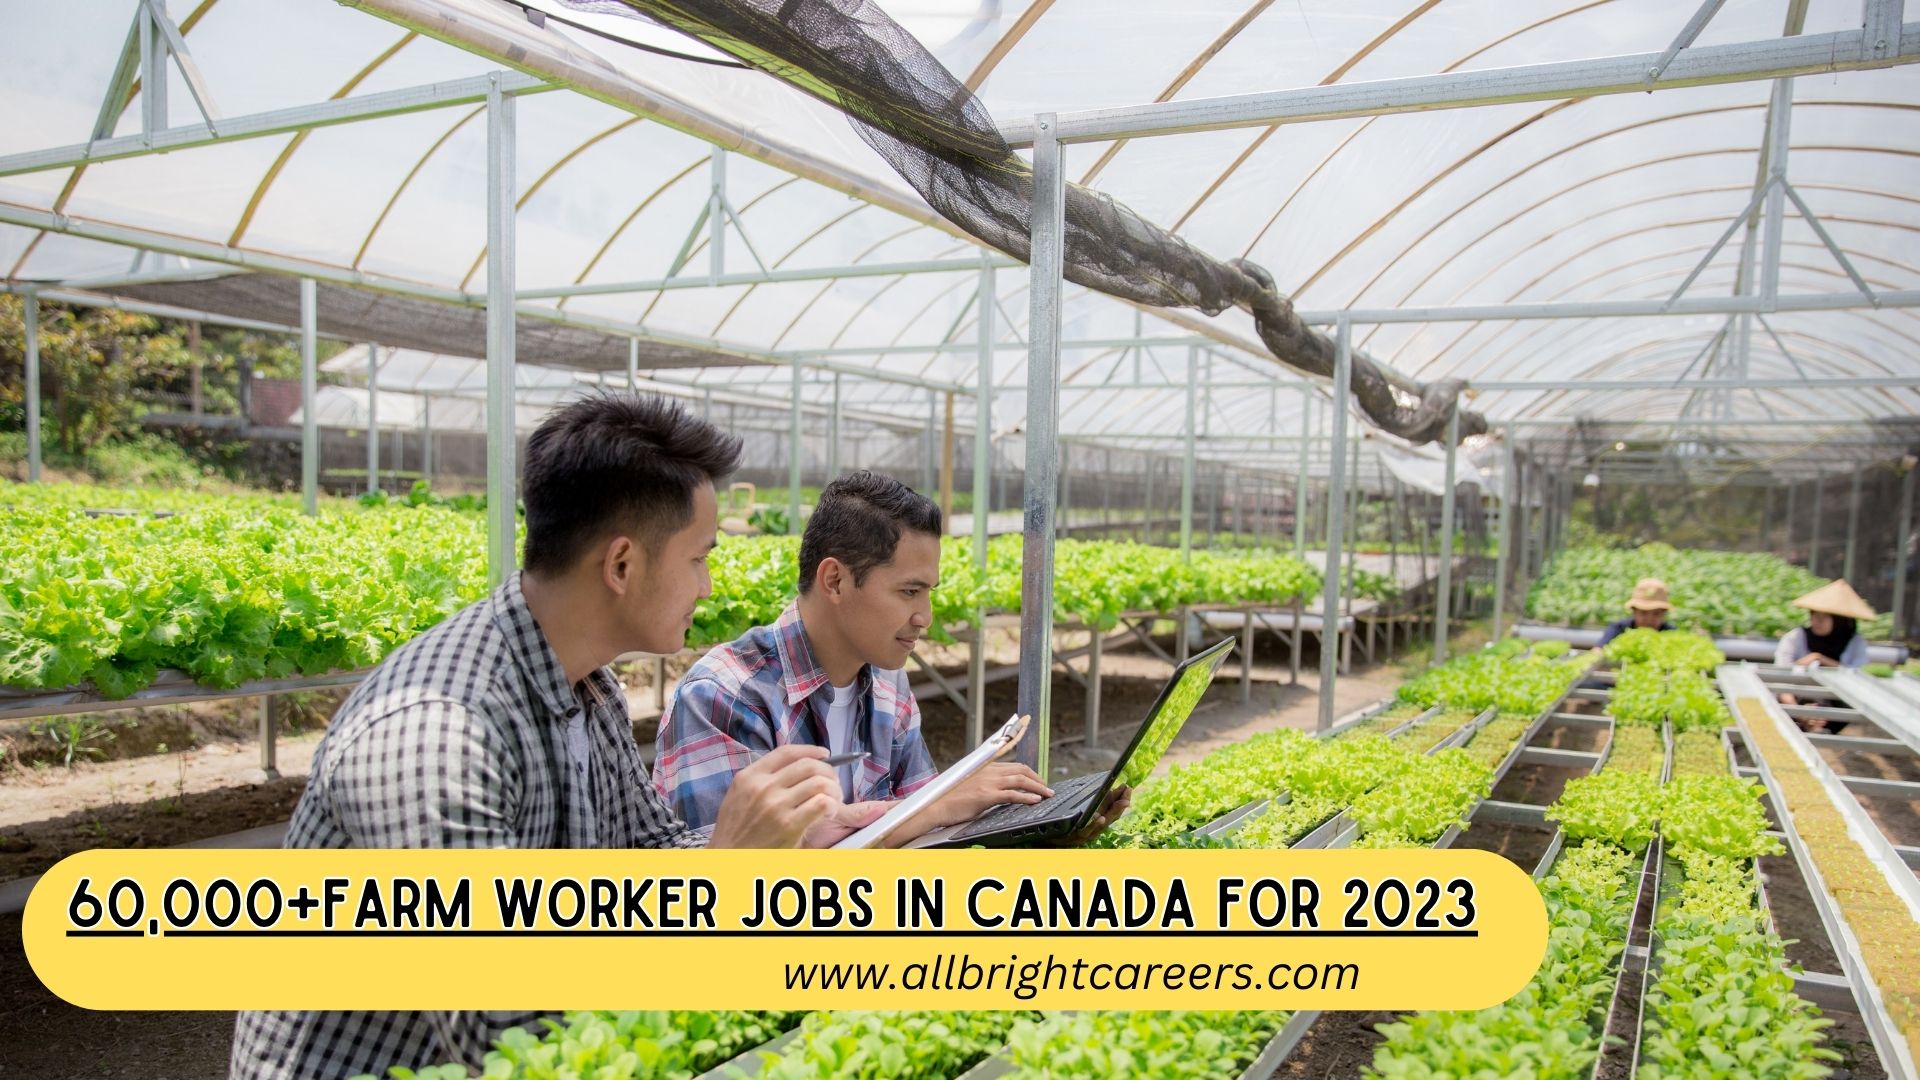 60,000+Farm Worker Jobs in Canada for 2023